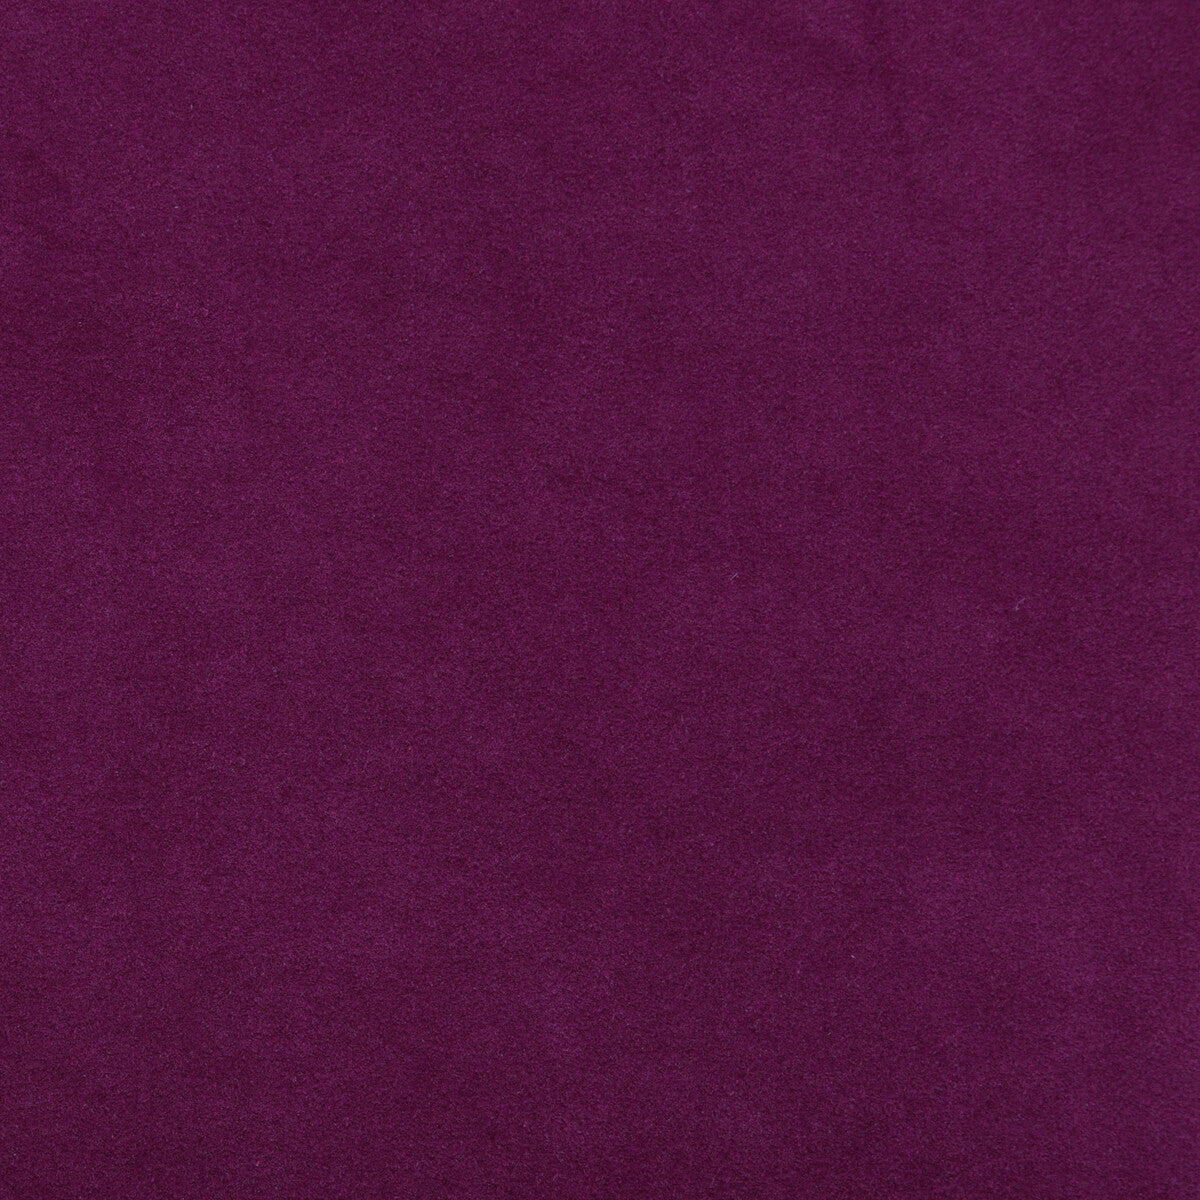 Ultimate fabric in orchid color - pattern 960122.97.0 - by Lee Jofa in the Ultimate Suede collection